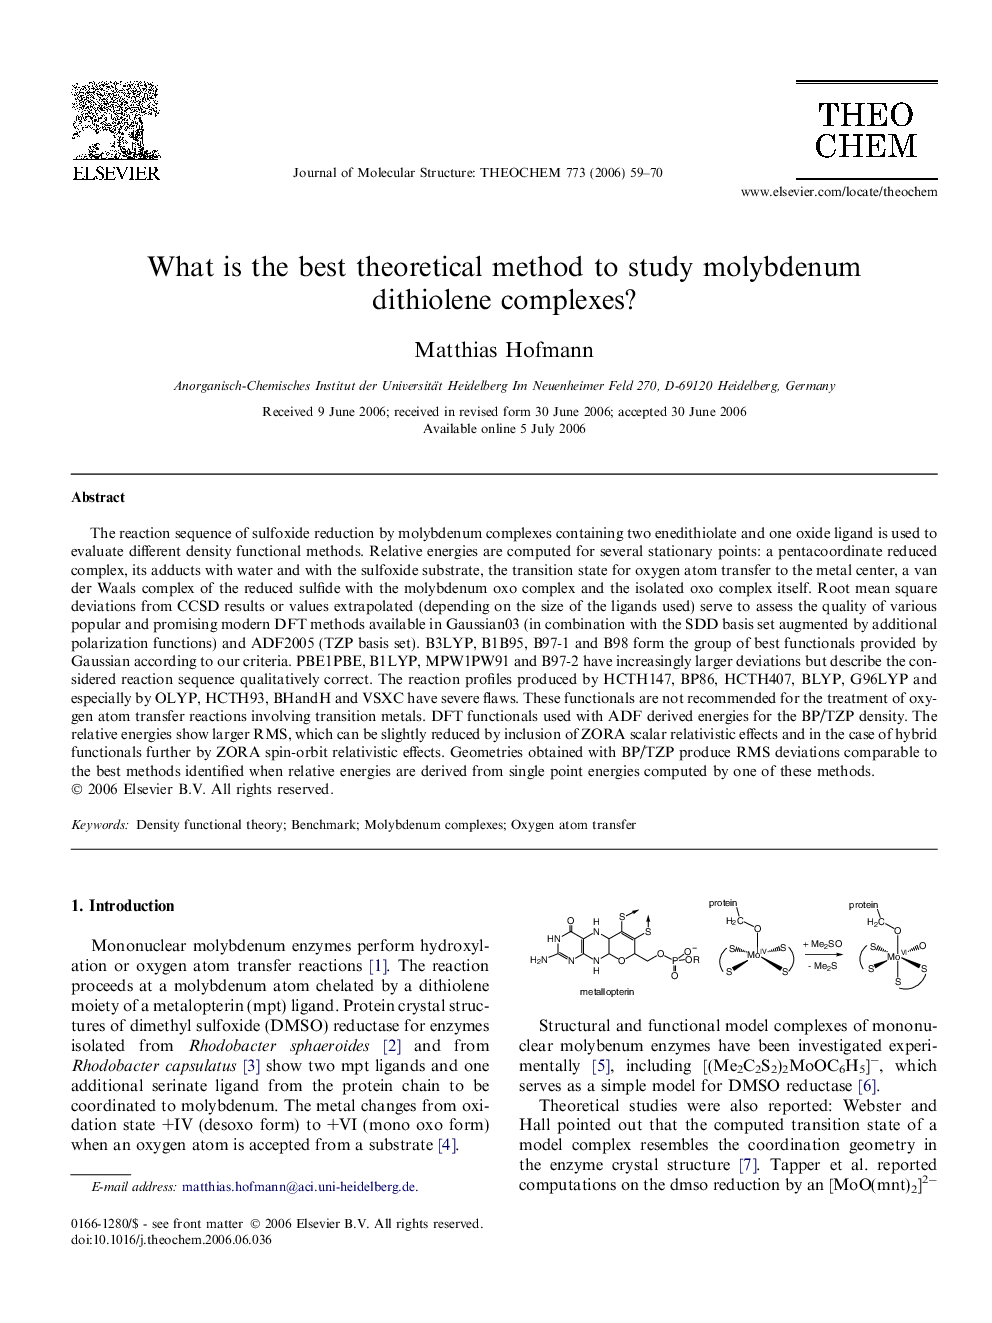 What is the best theoretical method to study molybdenum dithiolene complexes?